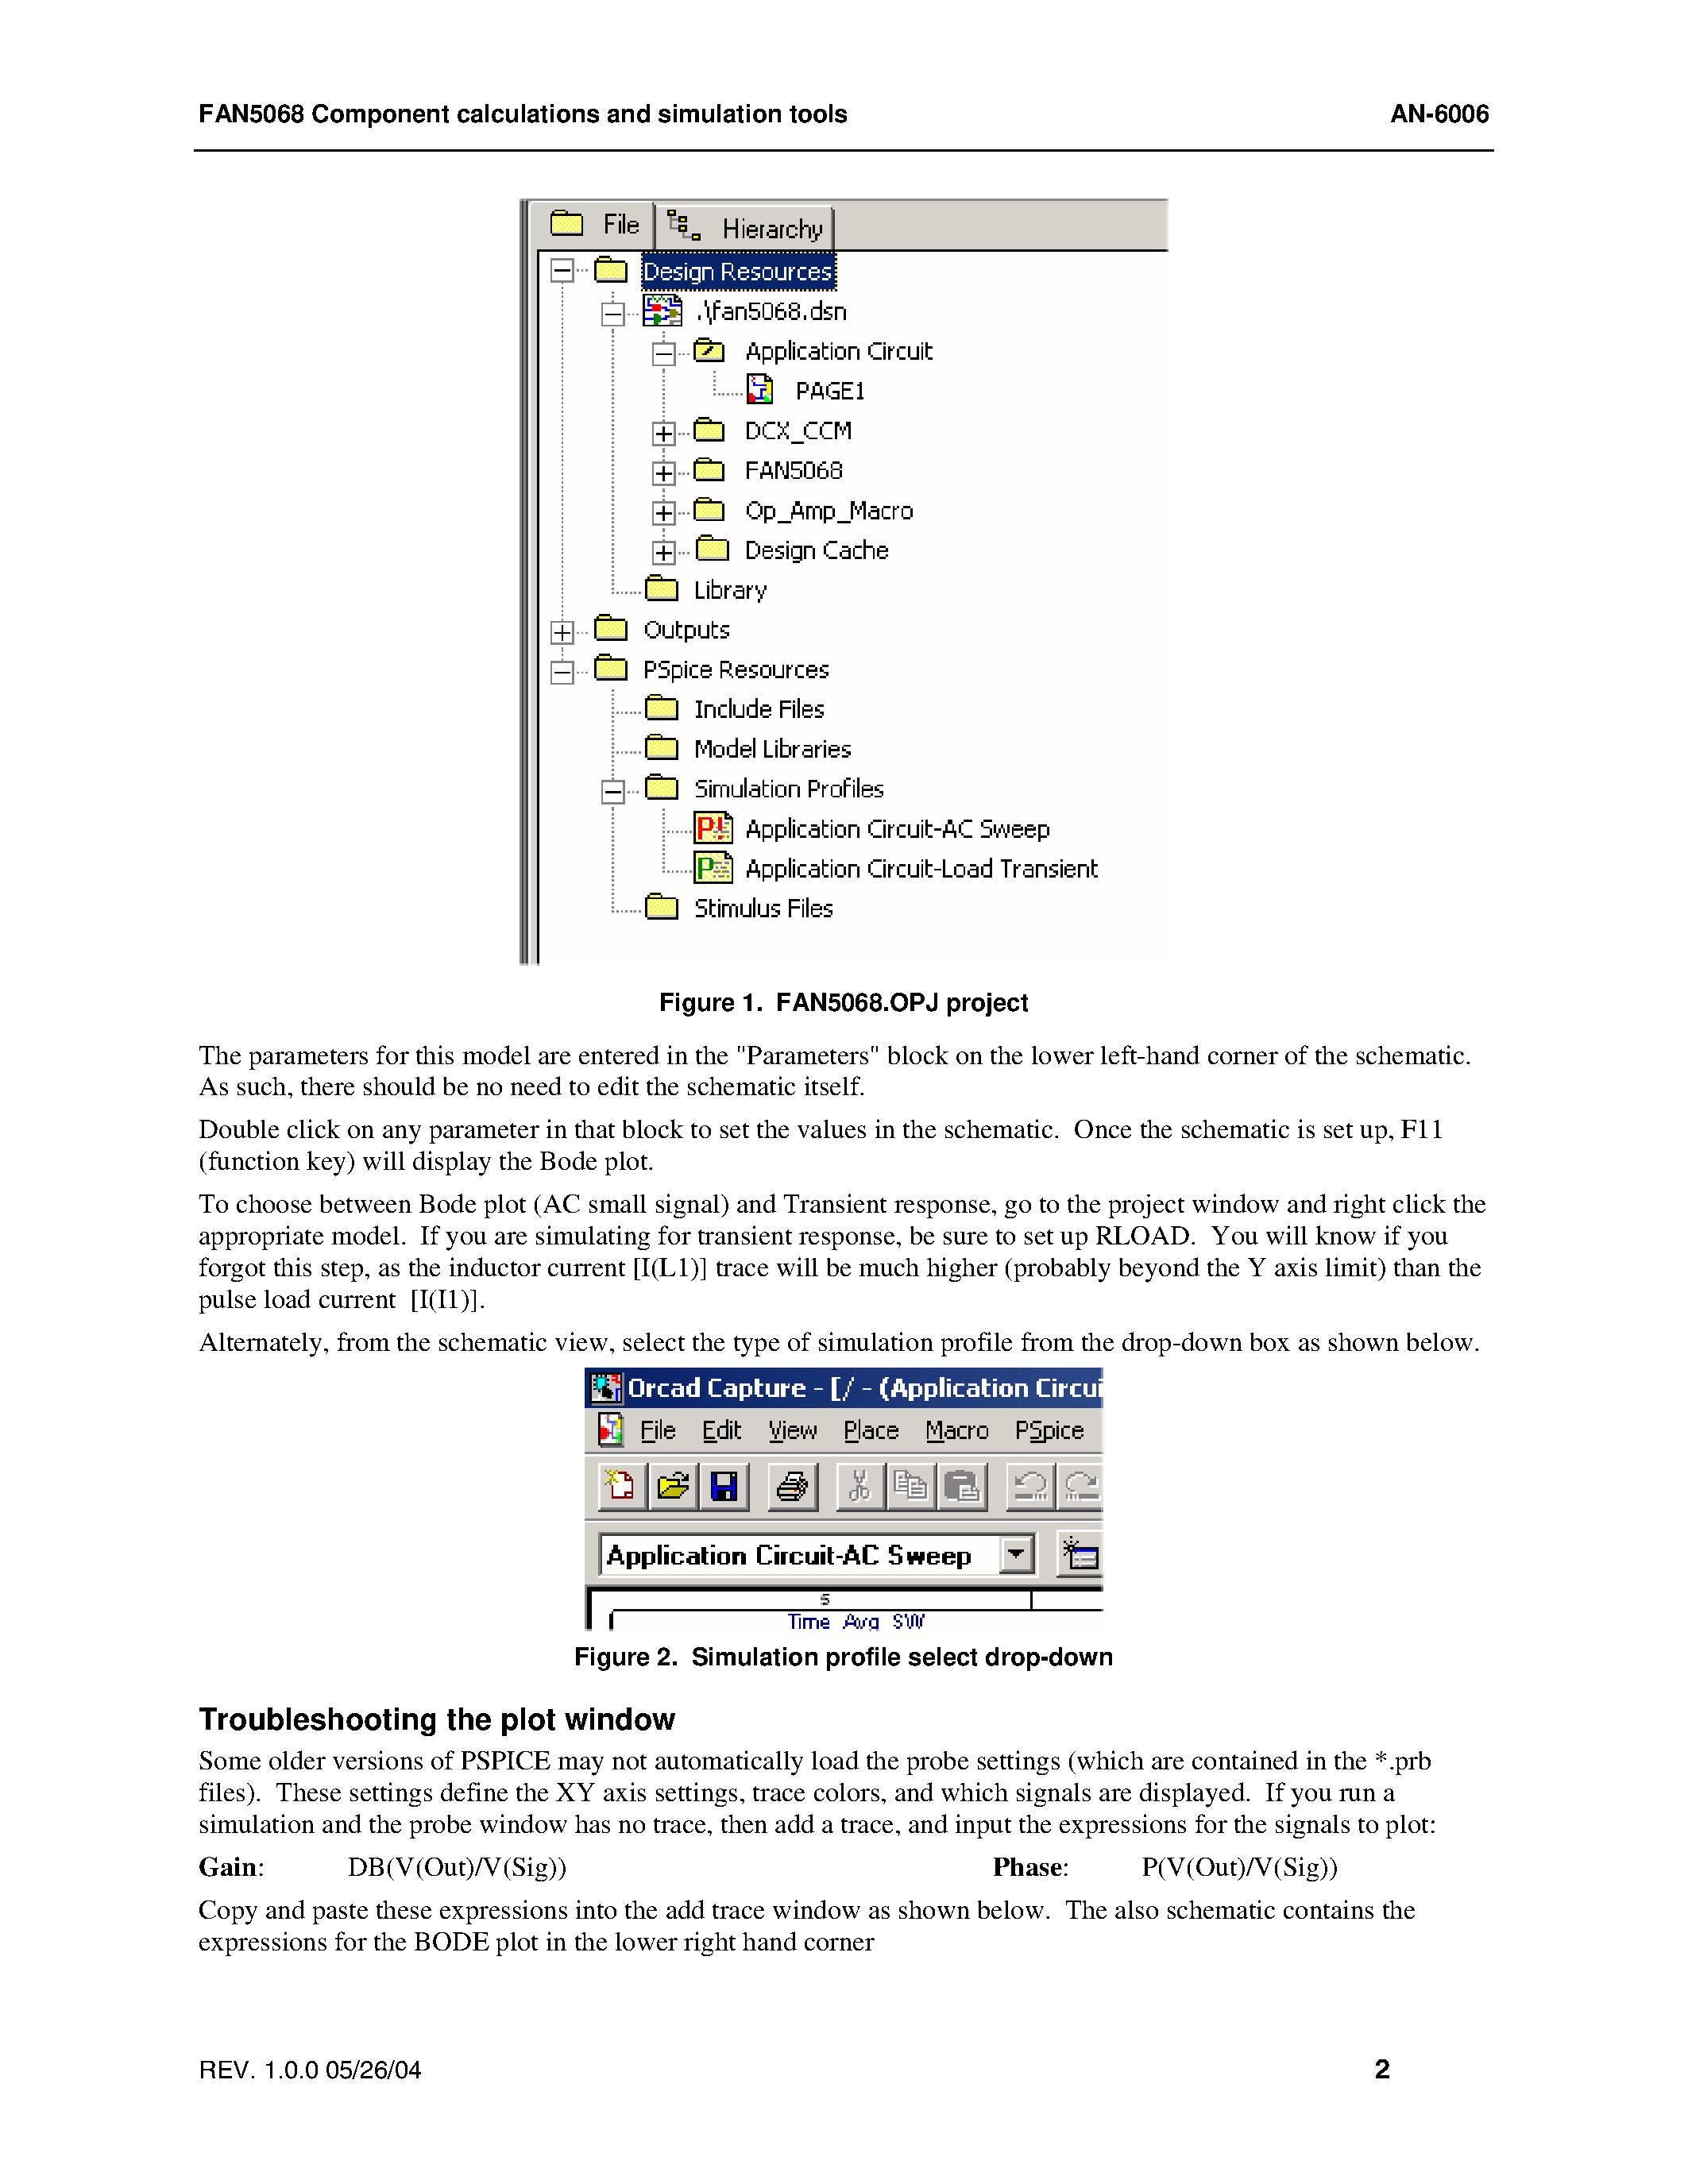 Datasheet FAN5068DDR - FAN5068 Component calculation and simulation tools page 2